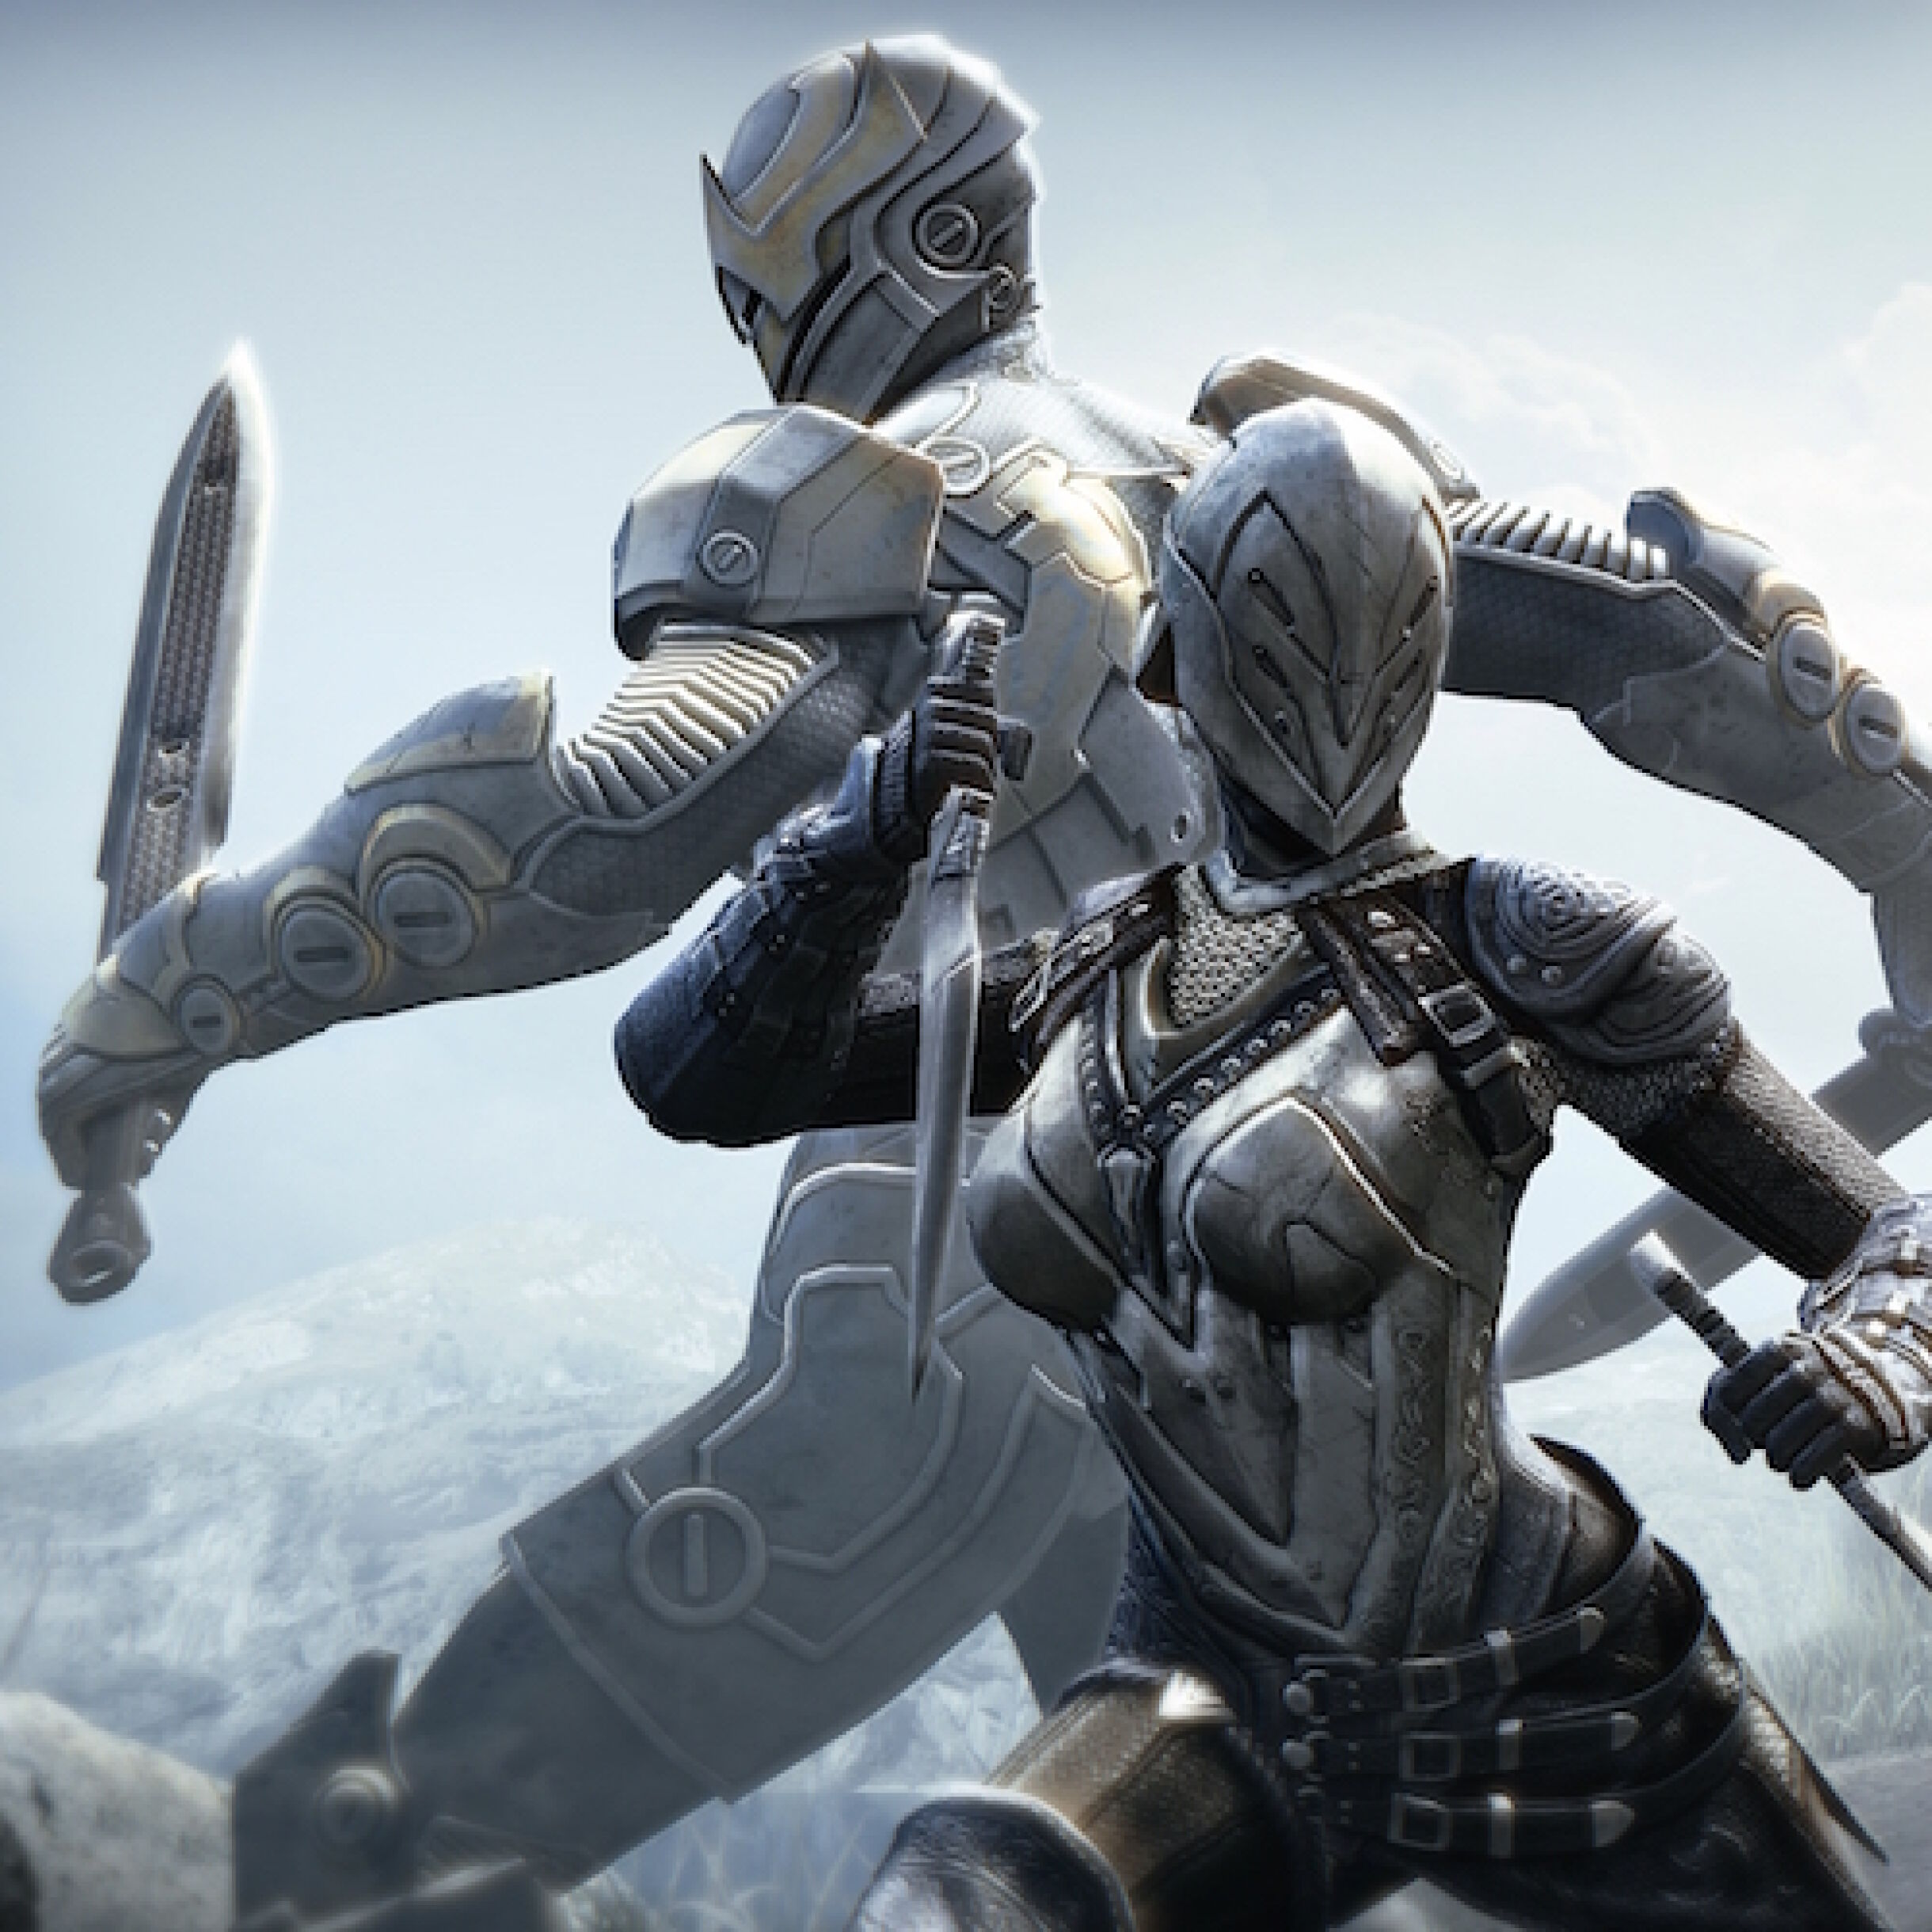 Download Epic Games' new free Infinity Blade asset packs